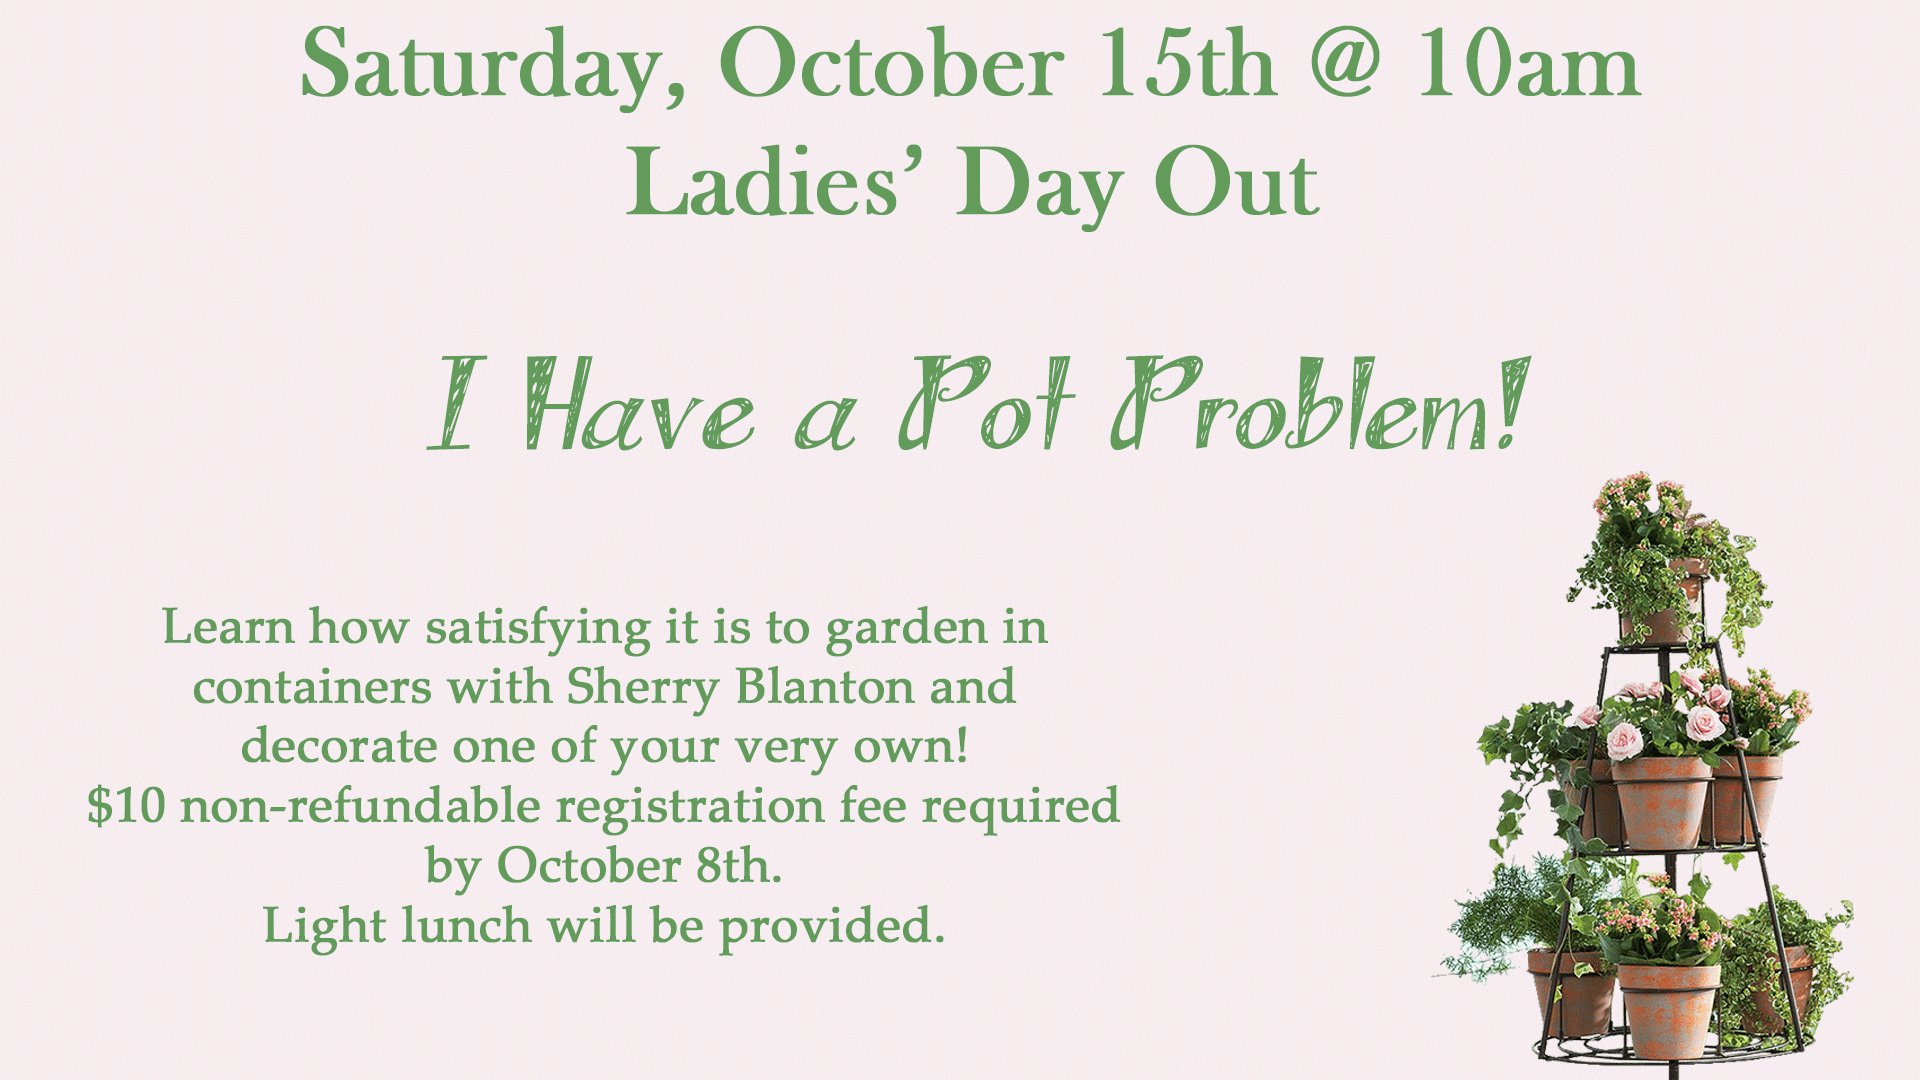 The next Ladies' Day Out is October 15th at 10am! $10 non-refundable registration fee is due by October 8th.